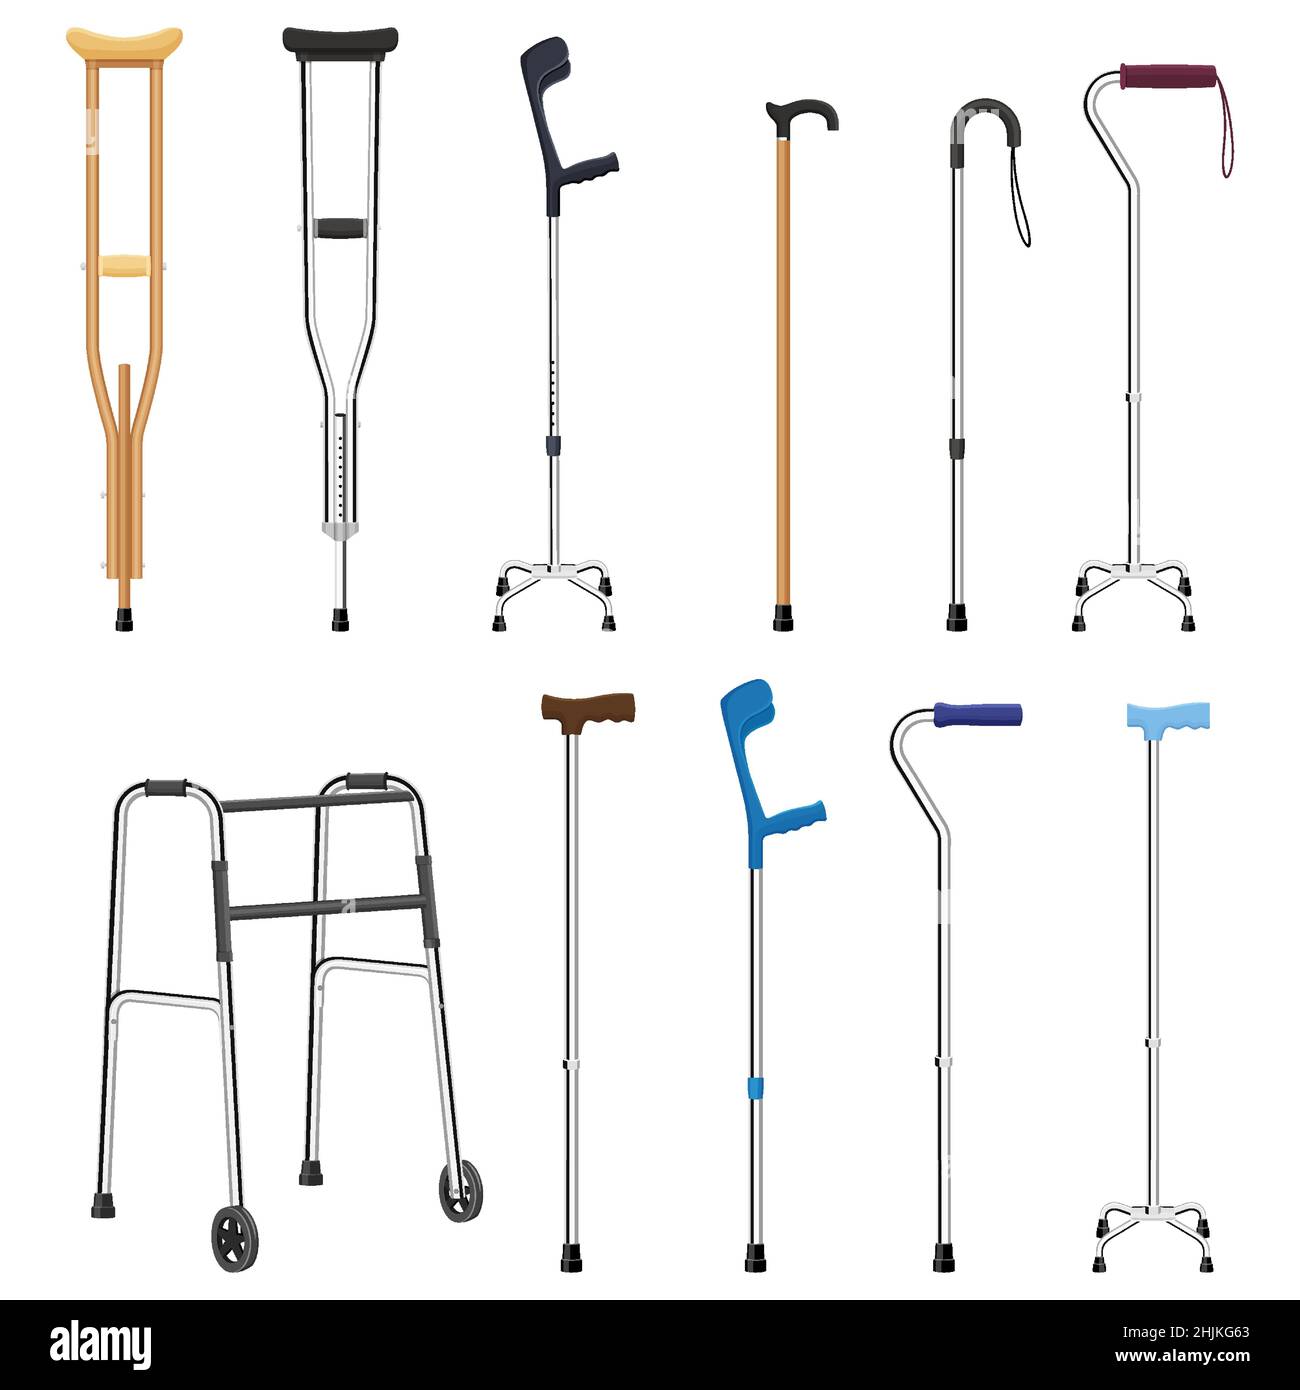 Set of mobility aids including walker, walking sticks and crutches. Telescopic metal canes, wooden cane, cane with additional support, telescopic crut Stock Vector